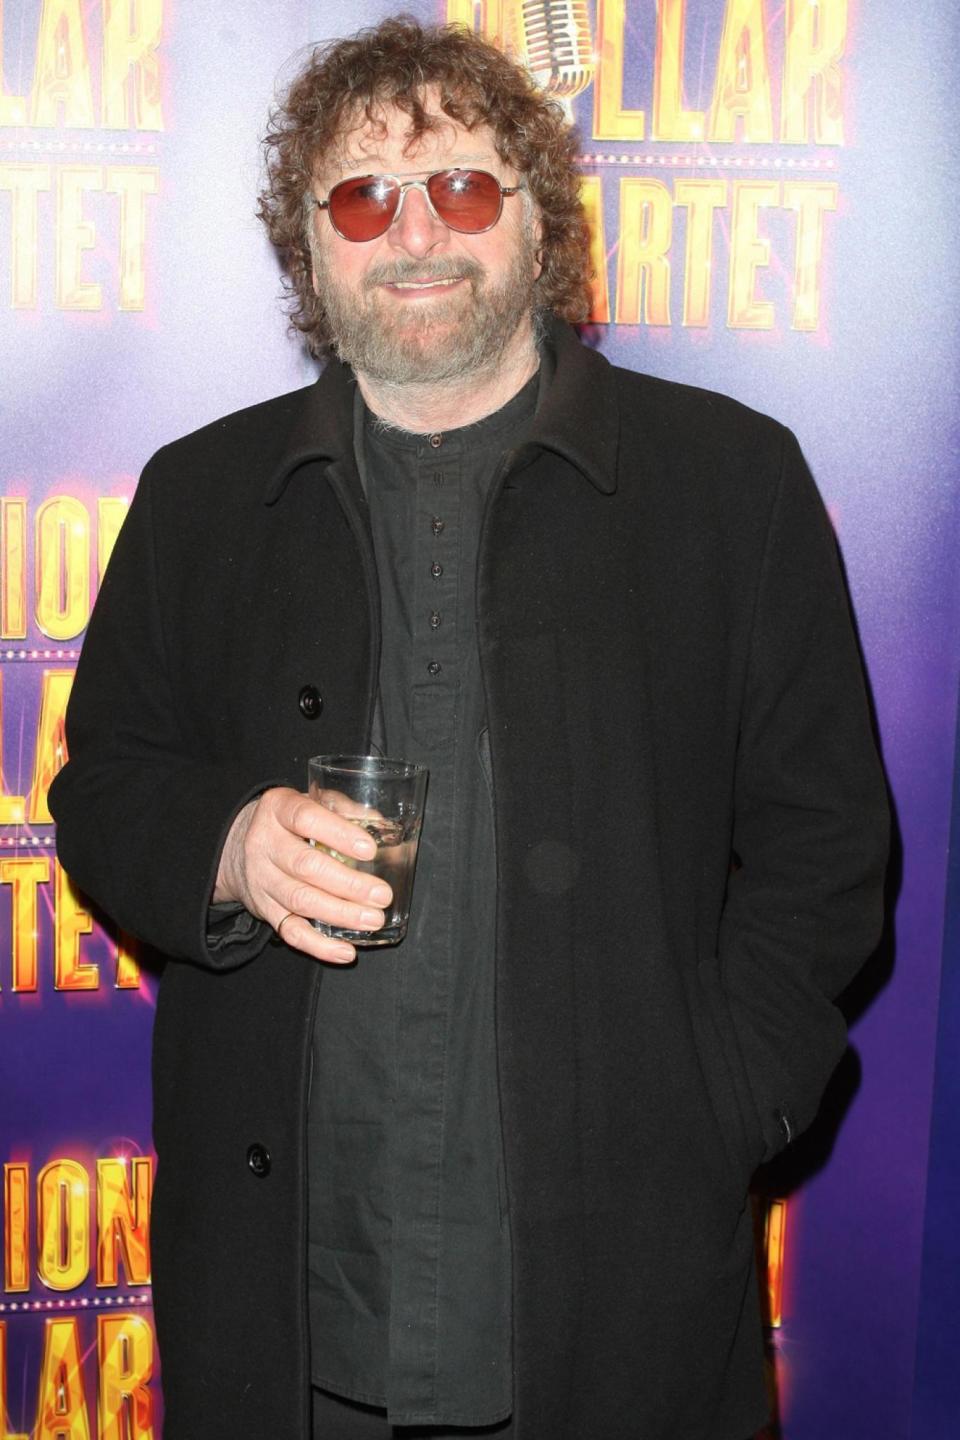 Receiving treatment: Chas Hodges, one half of music duo Chas & Dave (Dominic Lipinski/PA)